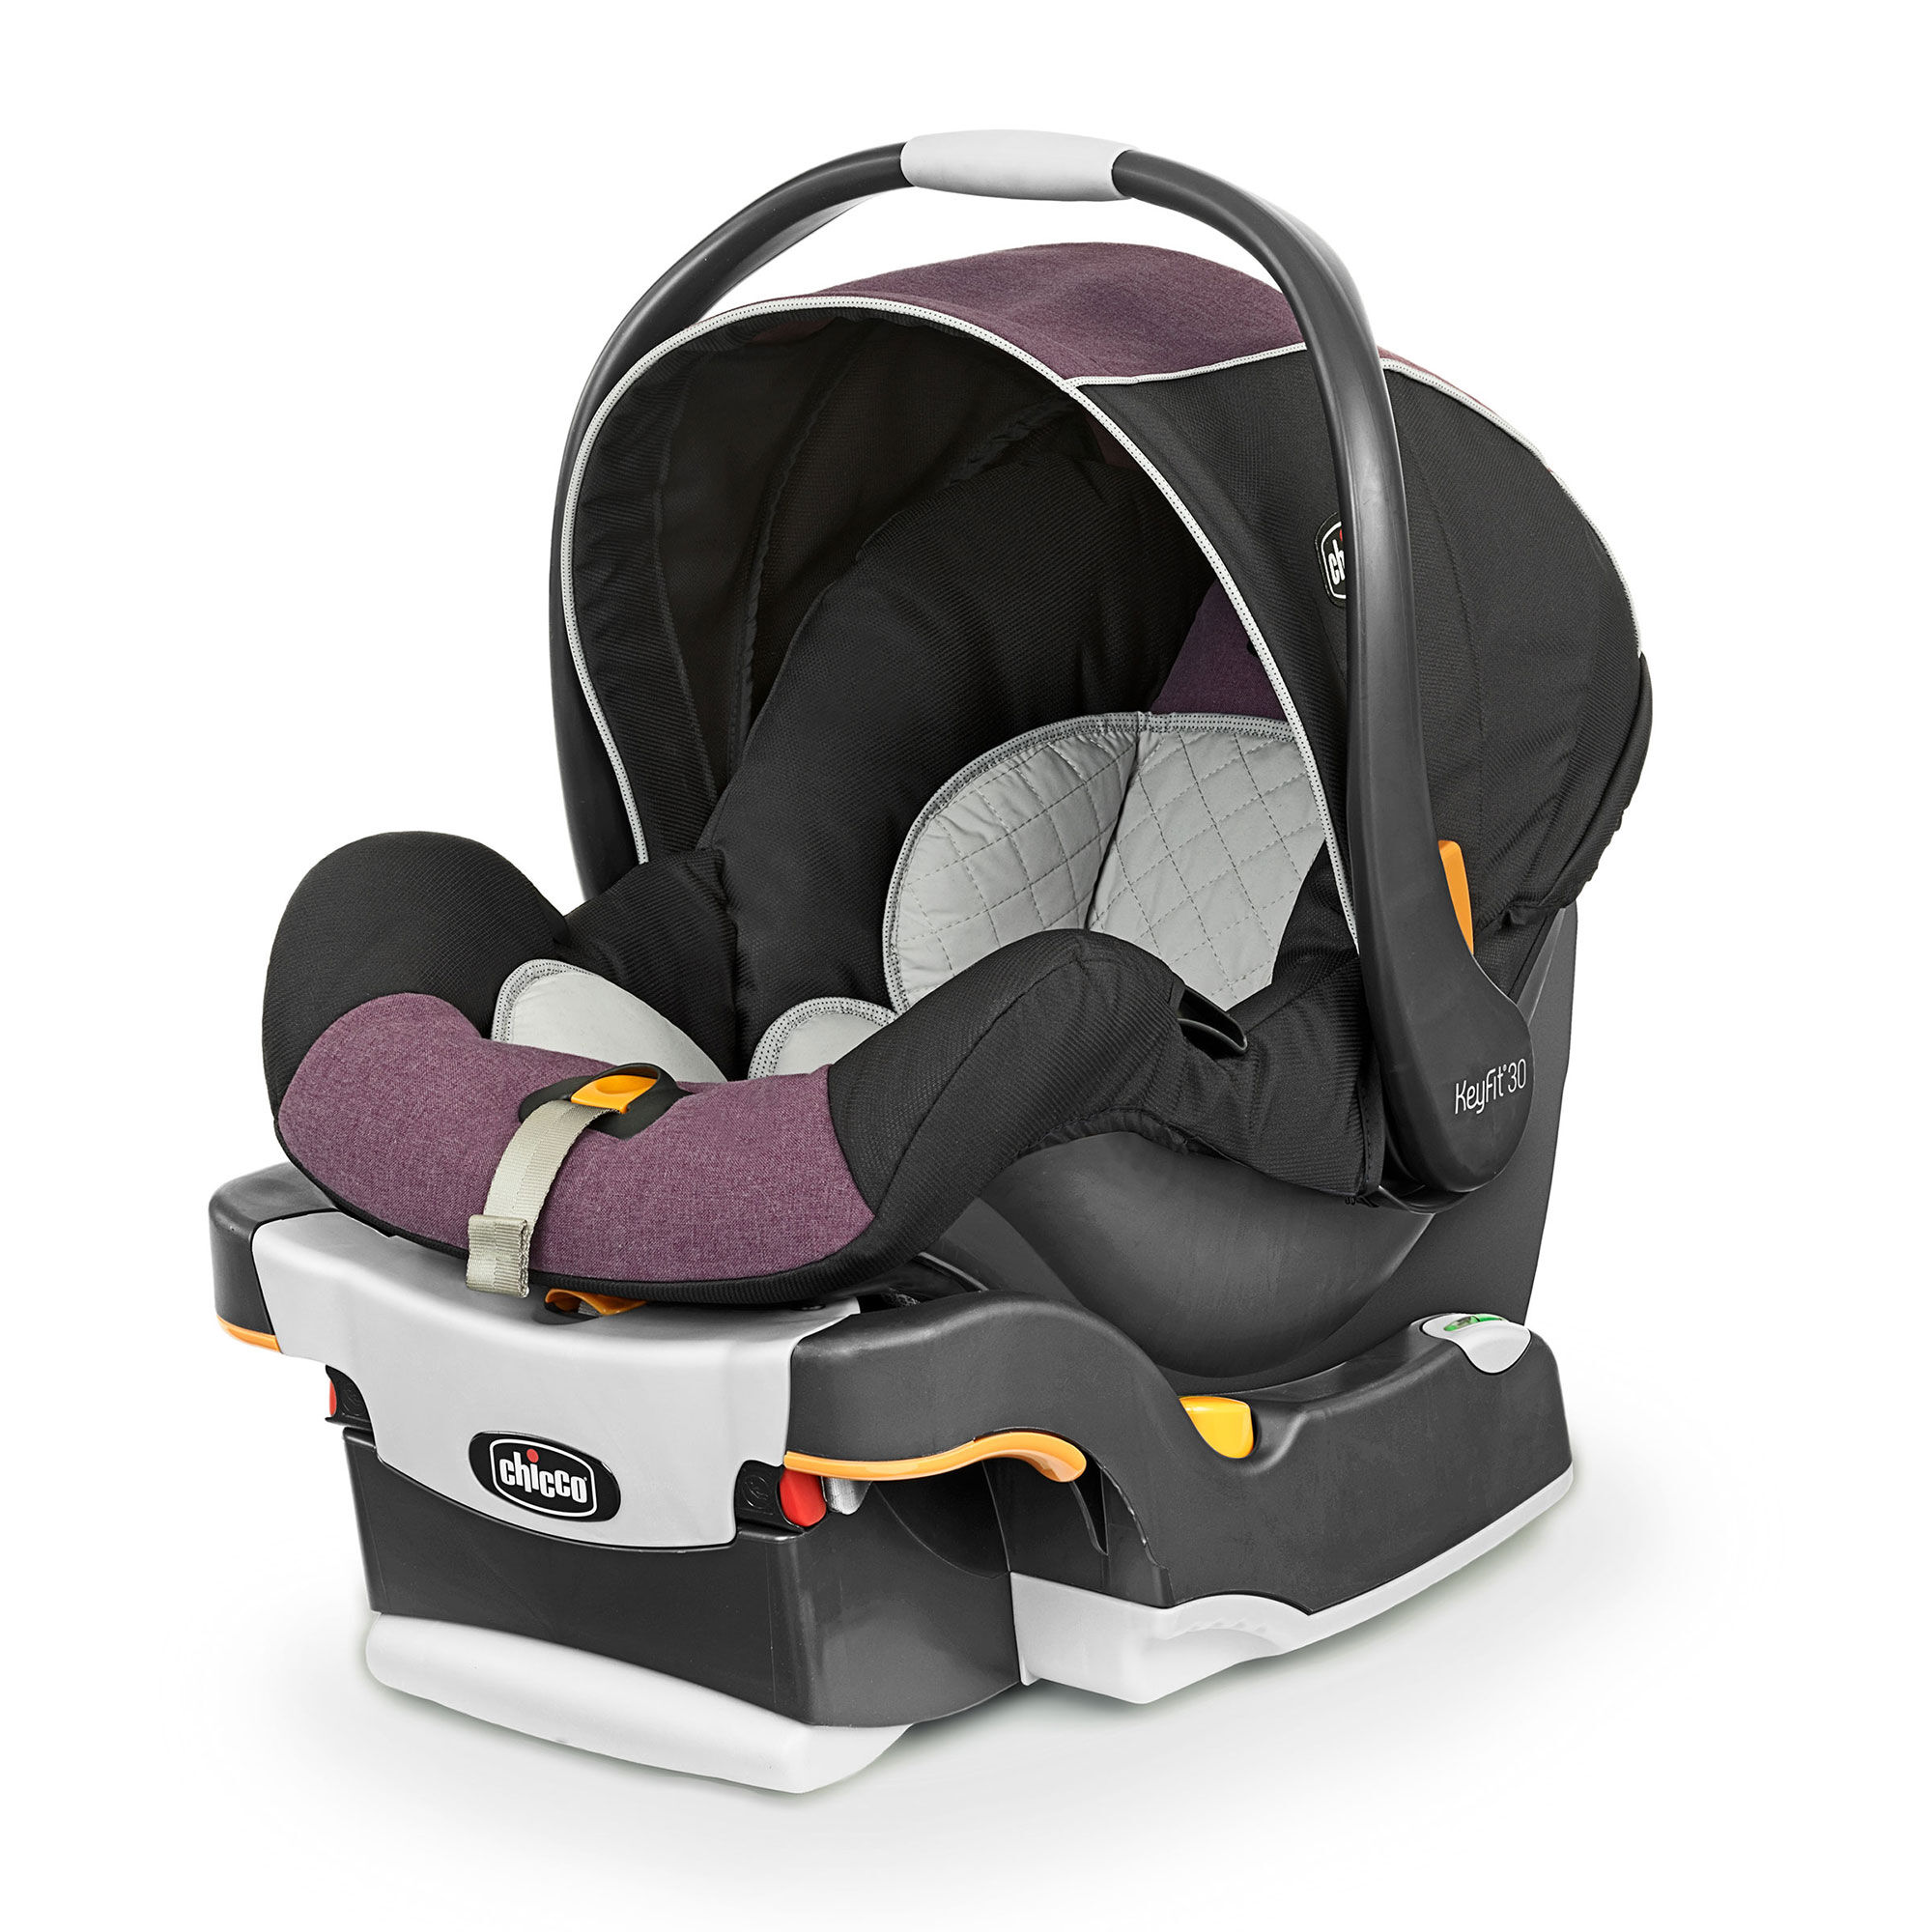 KeyFit-30-Infant-Car-Seat---Juneberry-|-Chicco